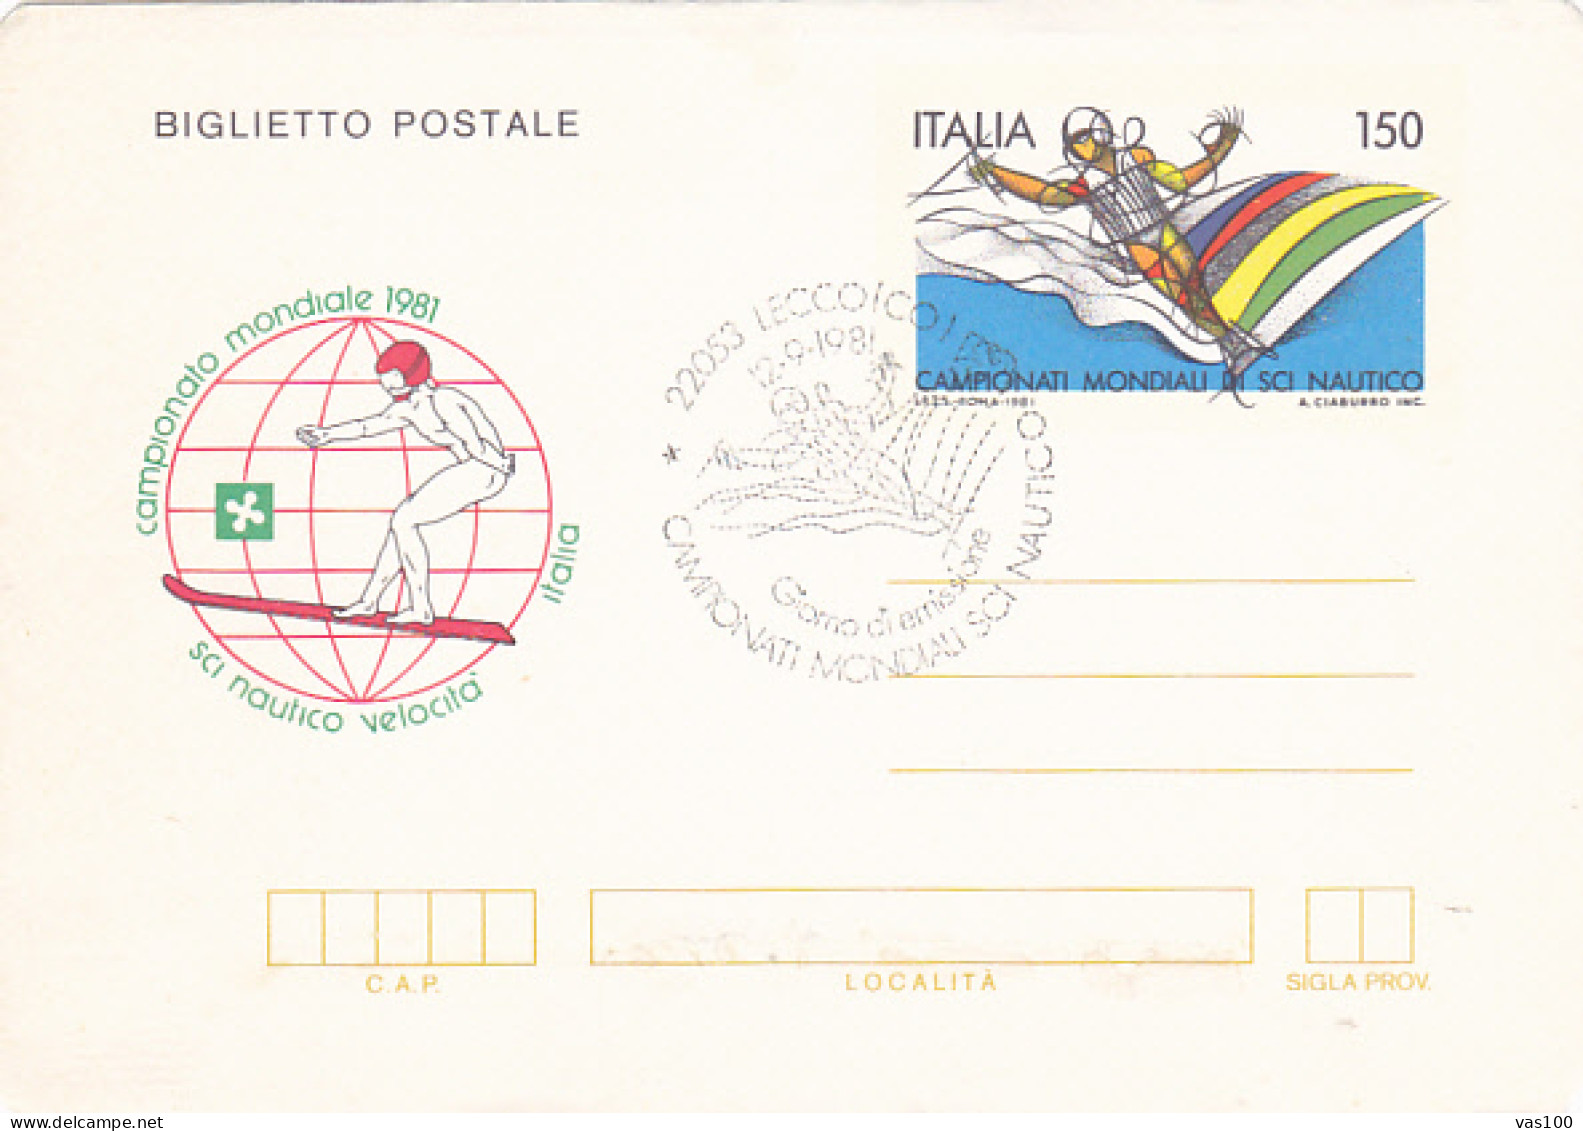 SPORTS, WATER SKIING, WORLD CHAMPIONSHIP, LETTERCARD STATIONERY, ENTIER POSTAL, OBKIT FDC, 1981, ITALY - Waterski